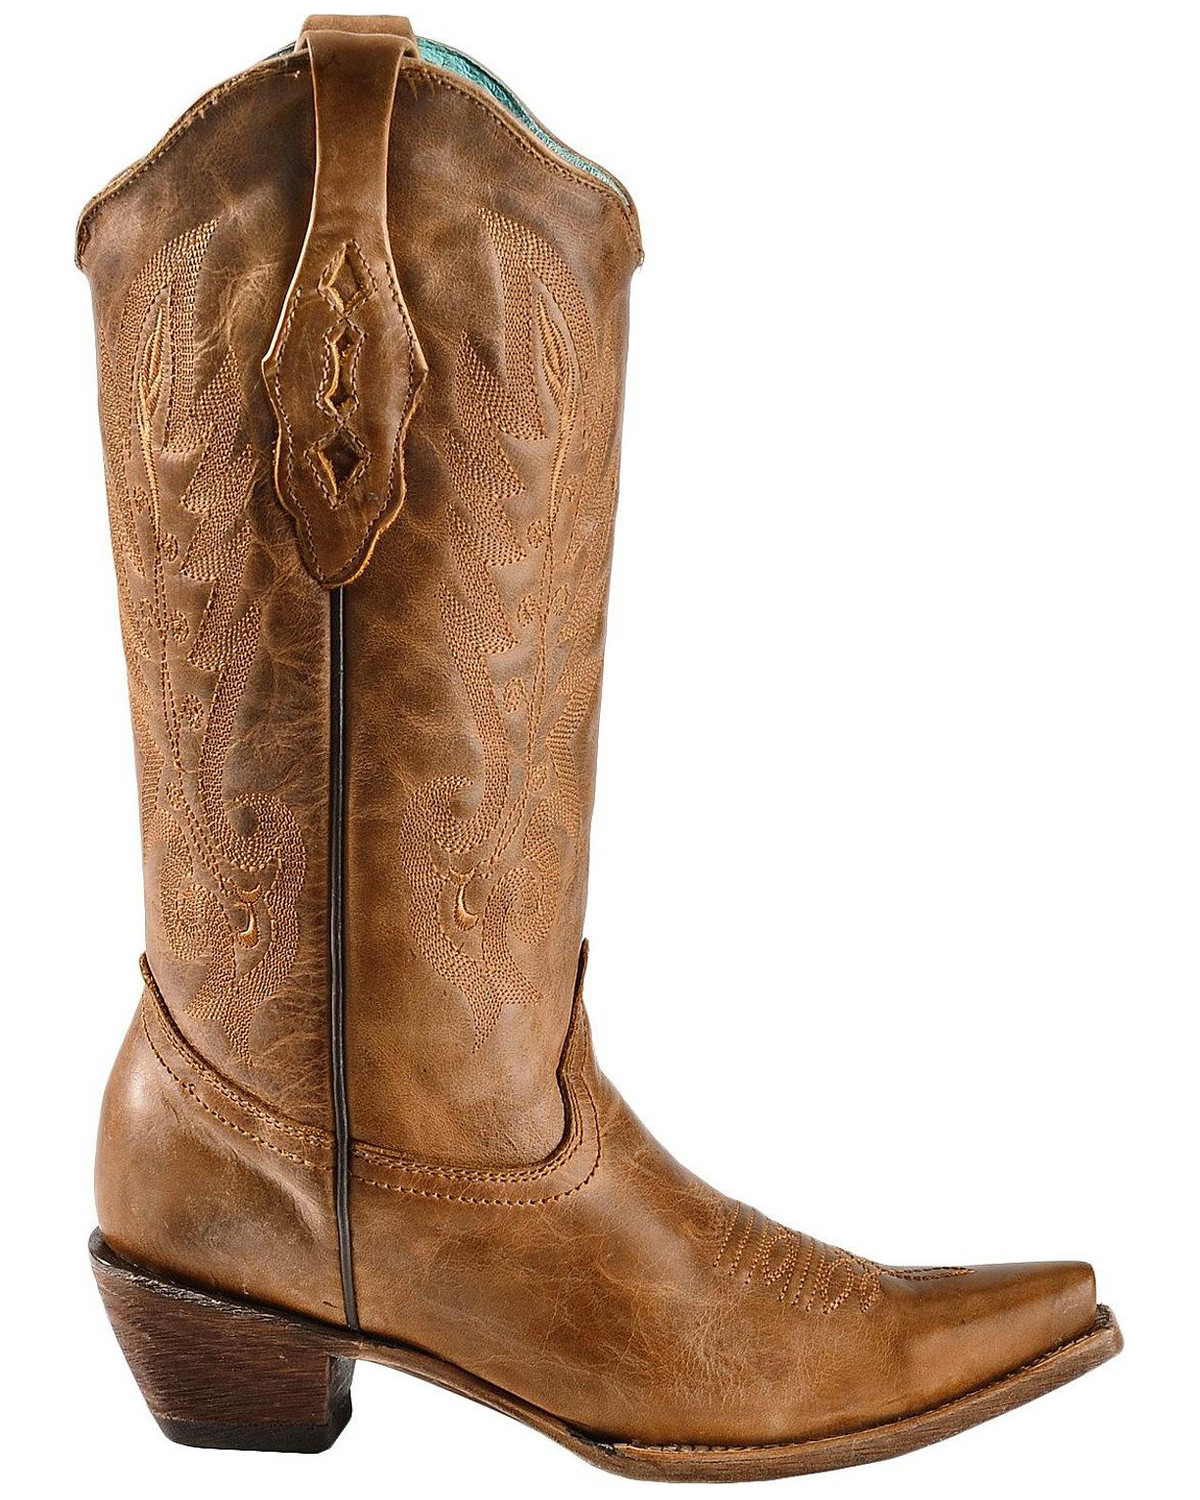 Corral Vintage Leather Cowgirl Boots - Snip Toe - Country Outfitter